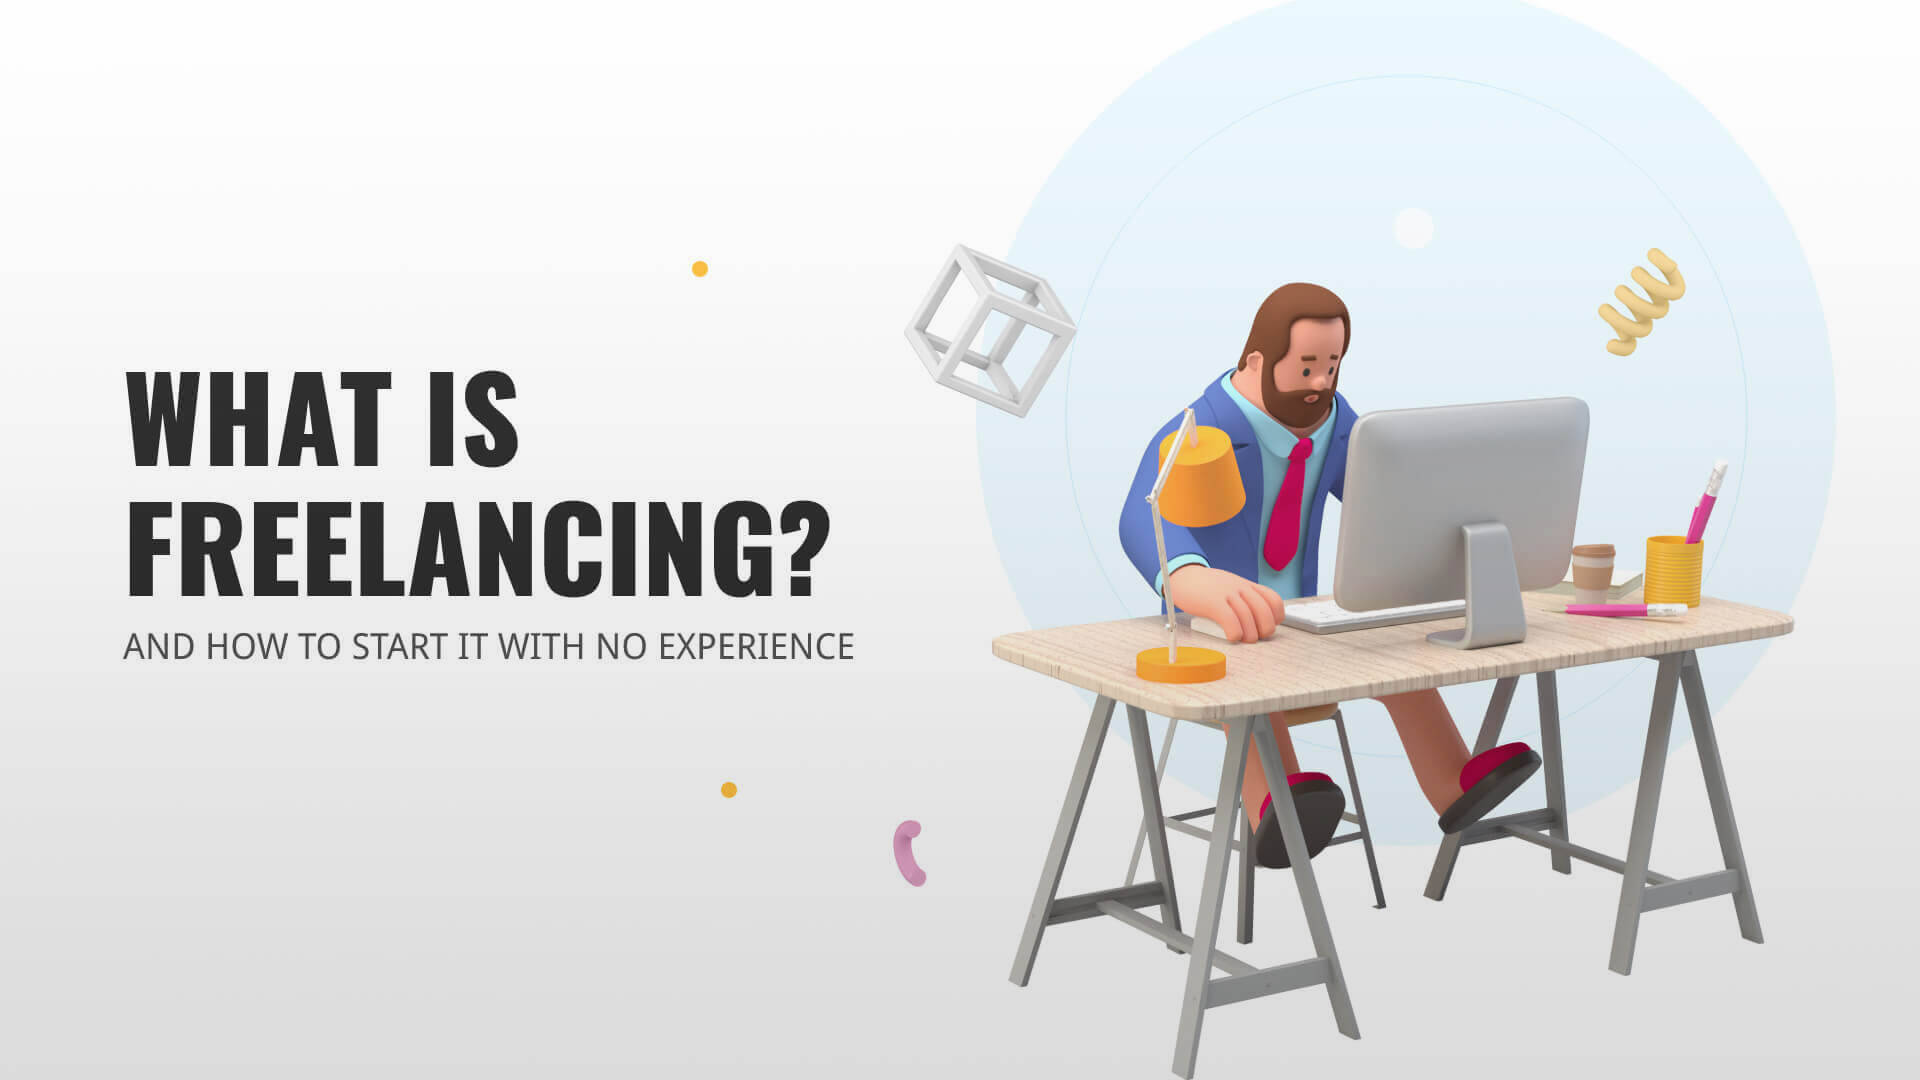 What Is Freelancing? And How to Start It With No Experience